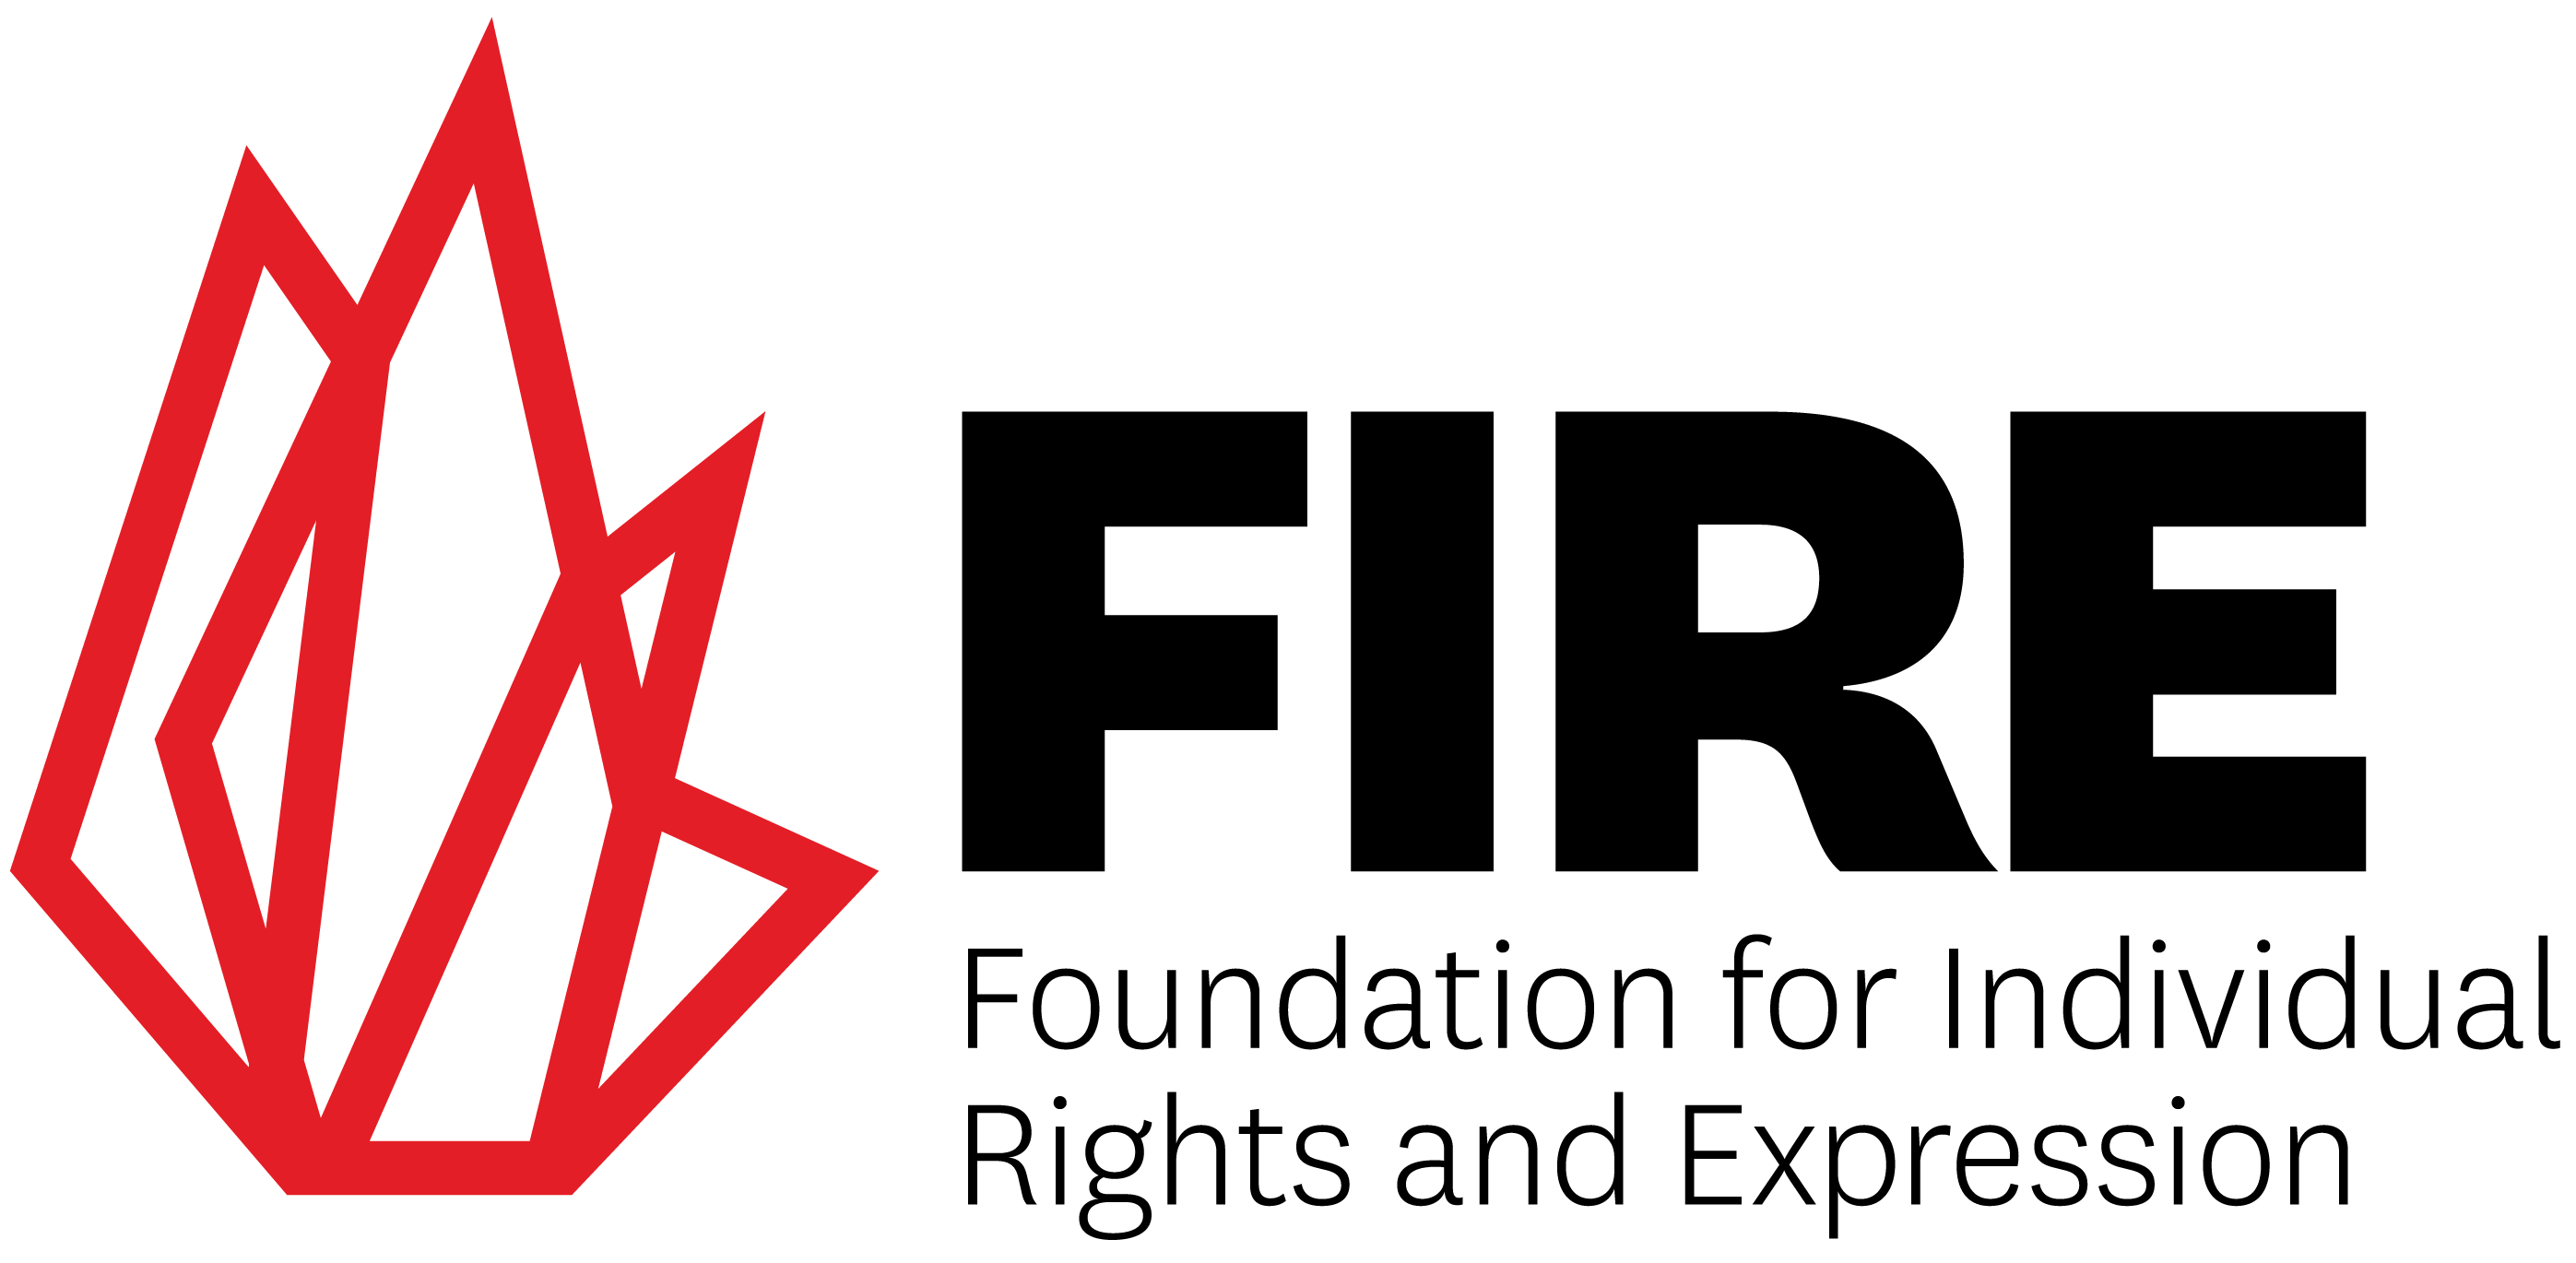 FIRE: Foundation for Individual Rights and Expression logo